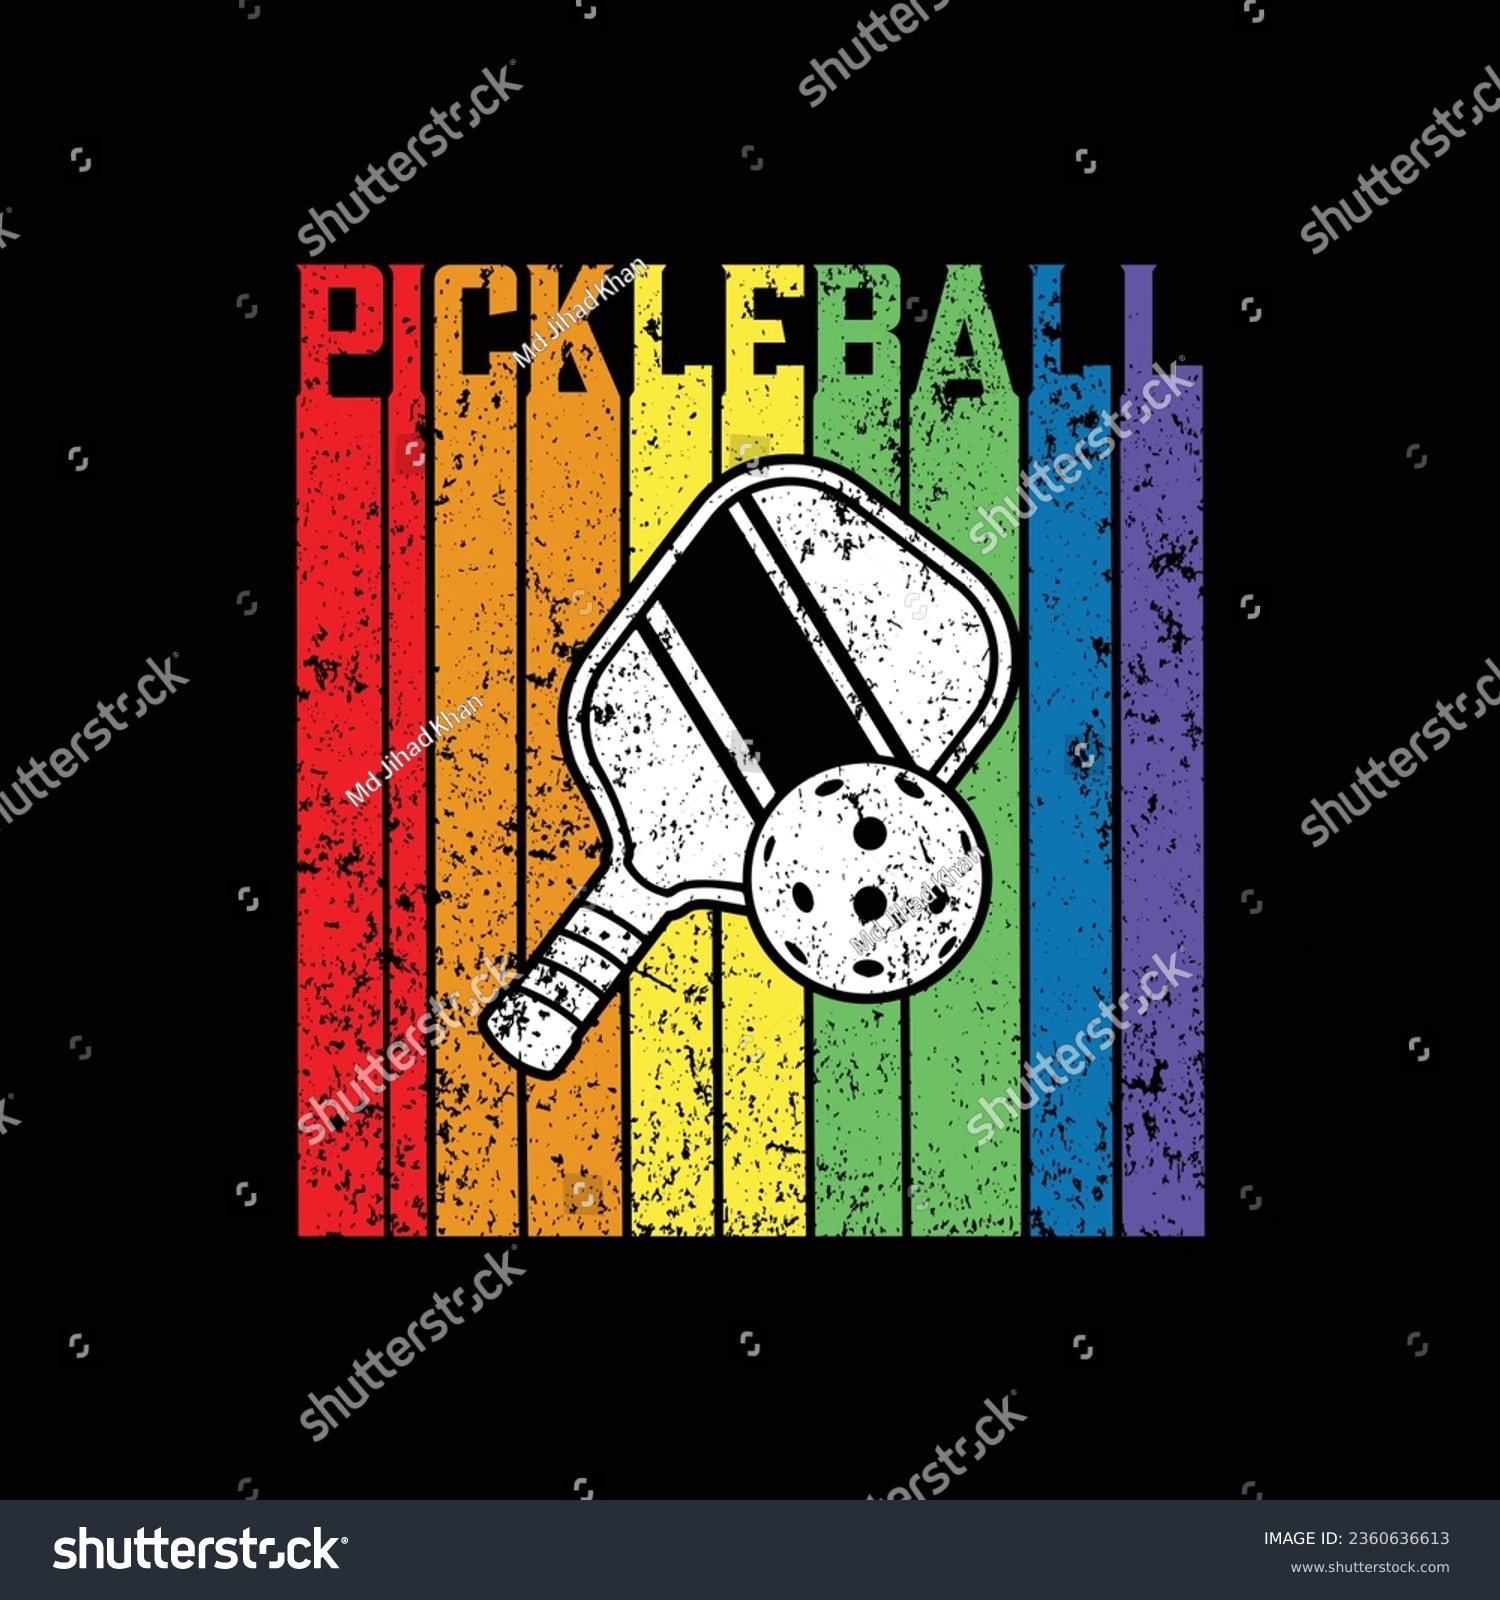 SVG of Pickball T-Shirt Design, Posters, Greeting Cards, Textiles, and Sticker Vector Illustration	
 svg